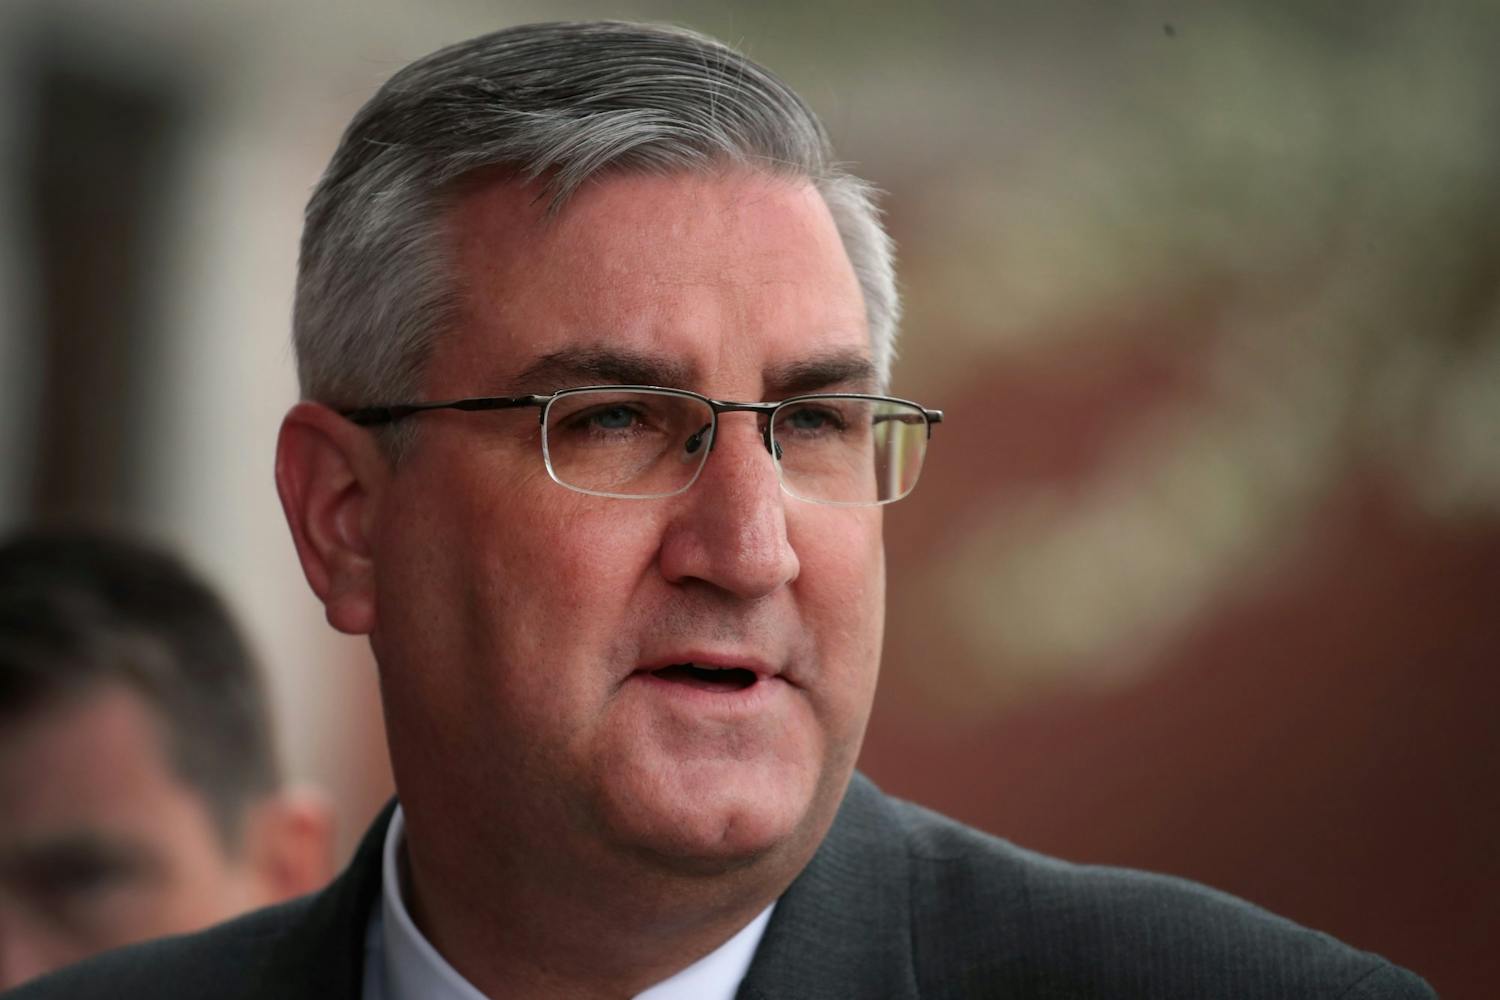 Indiana Gov. Eric Holcomb addresses the media after meeting with former residents and taking a brief tour of the West Calumet Housing Complex with EPA Administrator Scott Pruitt on April 19, 2017, in East Chicago, Indiana. The Associated Press has called the Indiana governor race for Eric Holcomb on Tuesday.